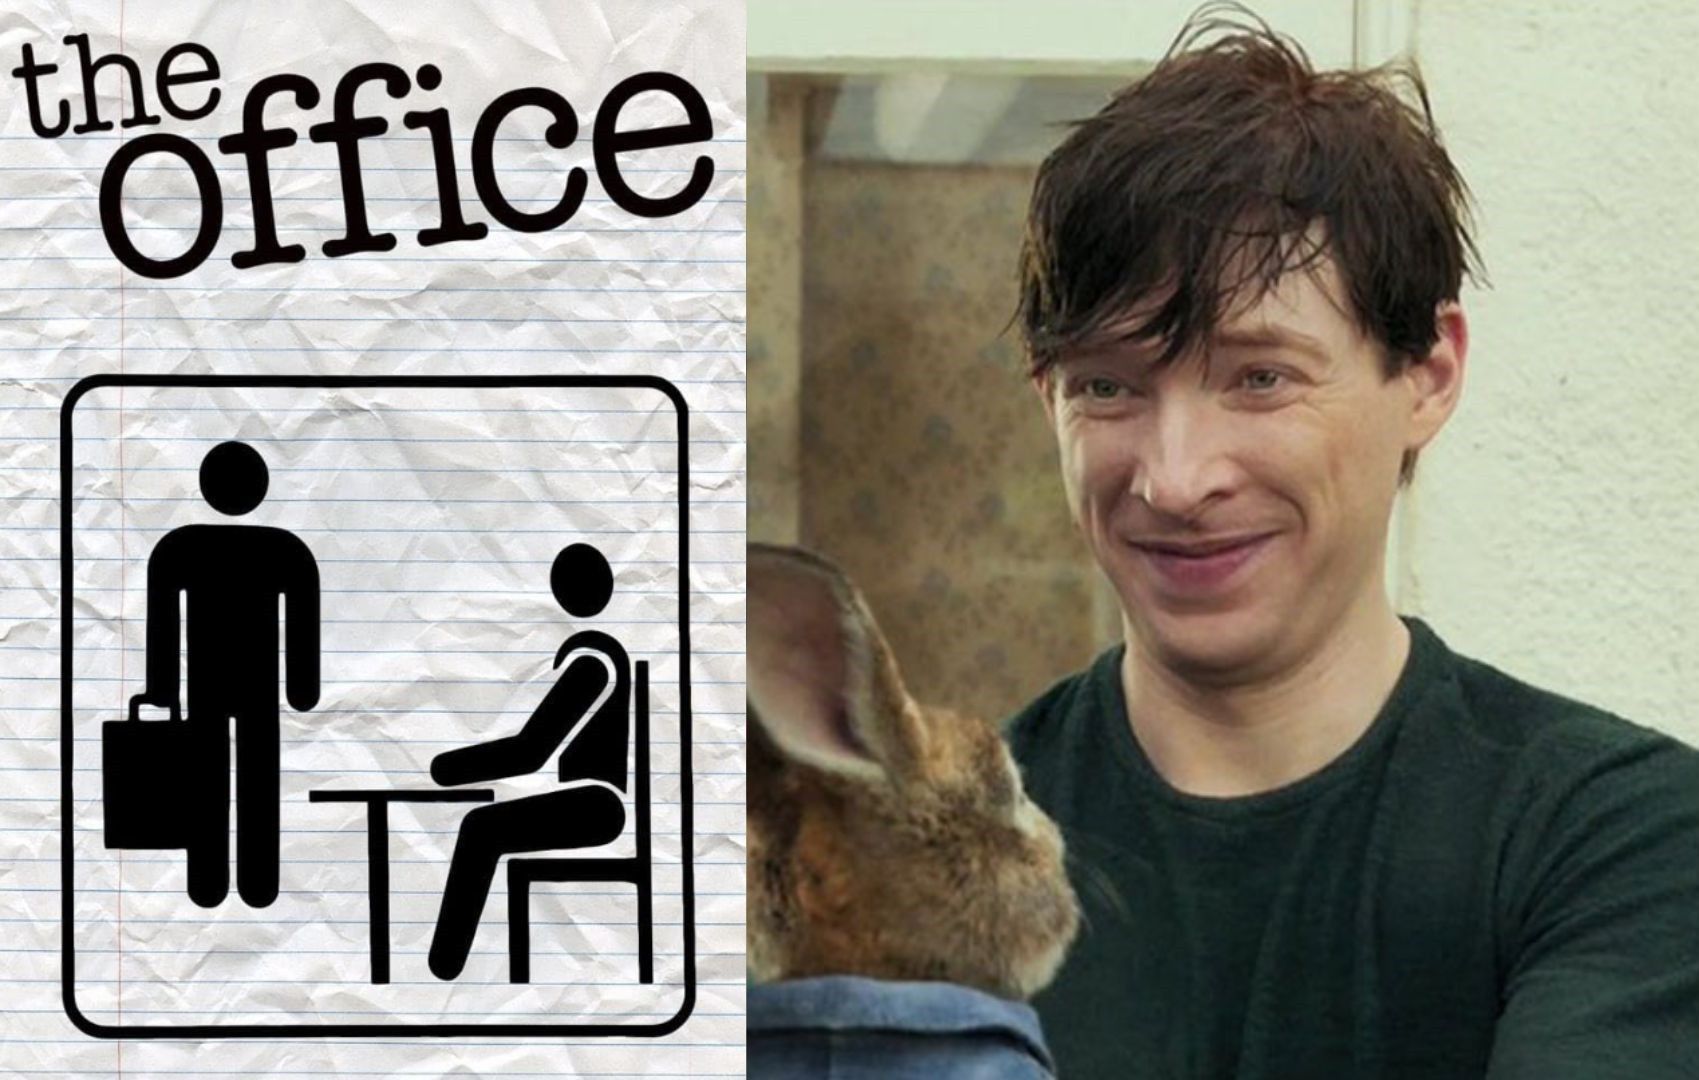 'The Office' follow-up show casts Domhnall Gleeson, Sabrina Impacciatore